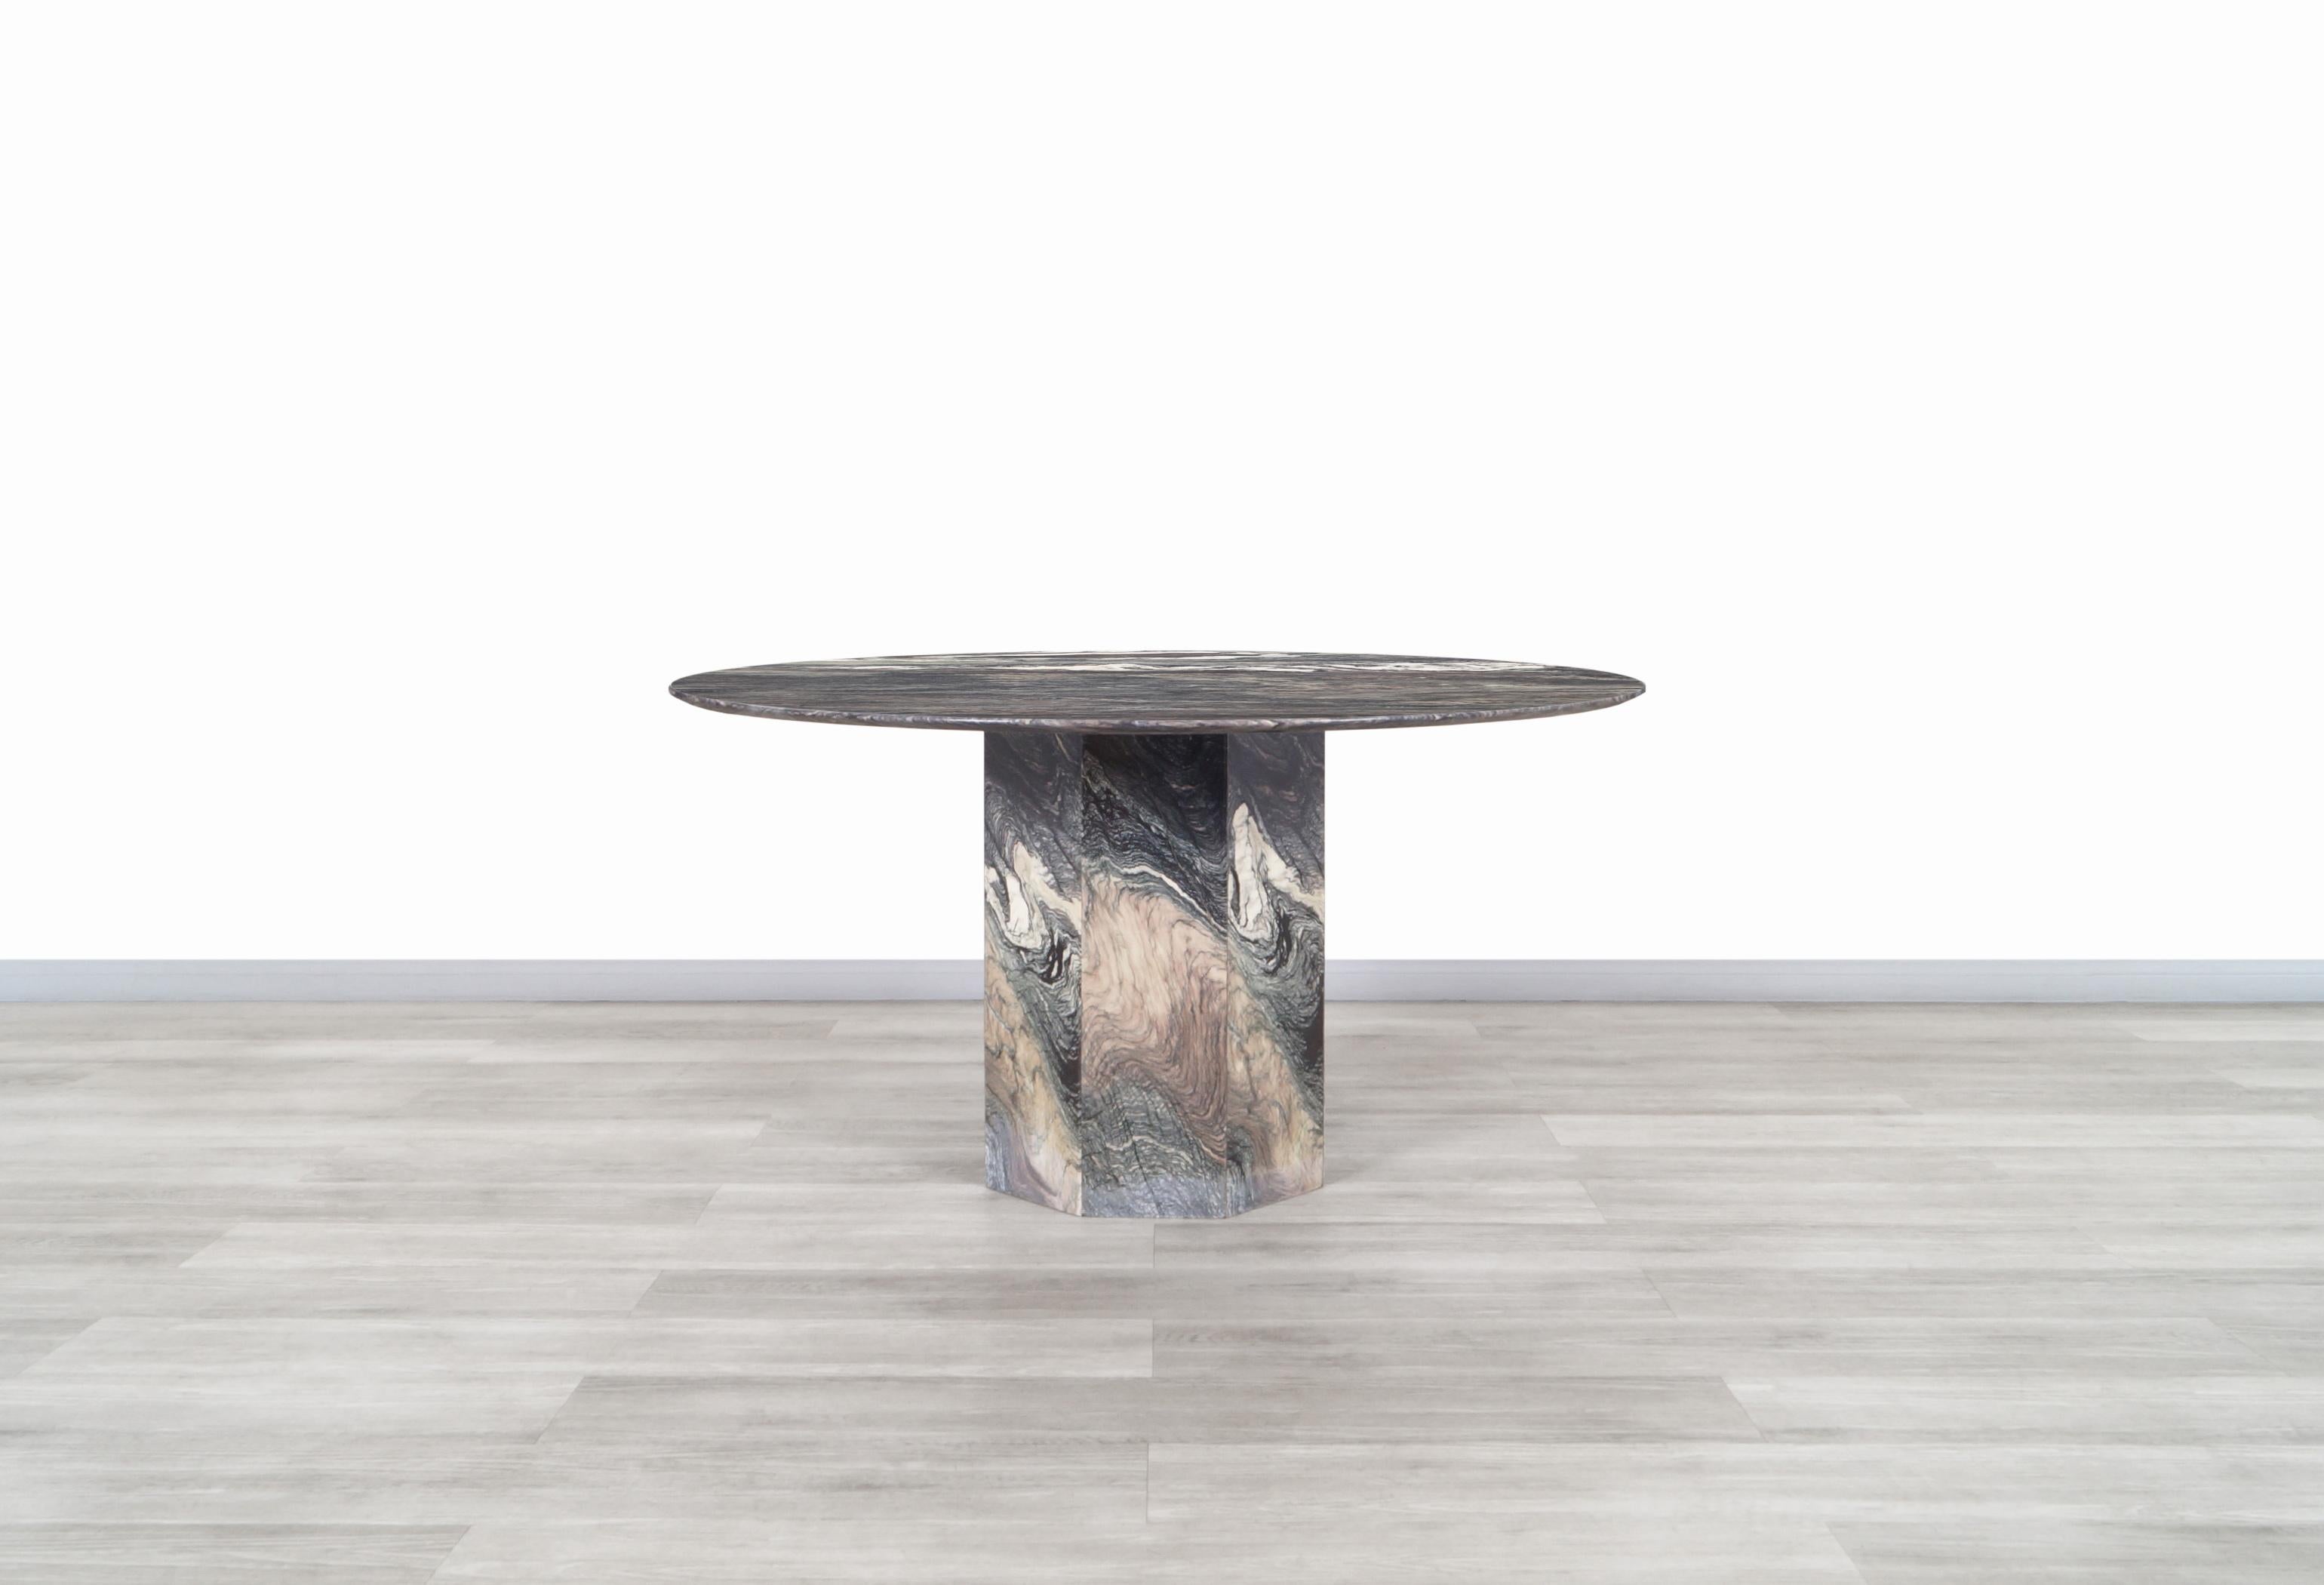 Amazing vintage Italian Cipollino Ondulato marble dining table designed and manufactured in Italy, circa 1970s. This table has a modern design where the rich veining distinguishes the highest quality of marble used in constructing this beautiful